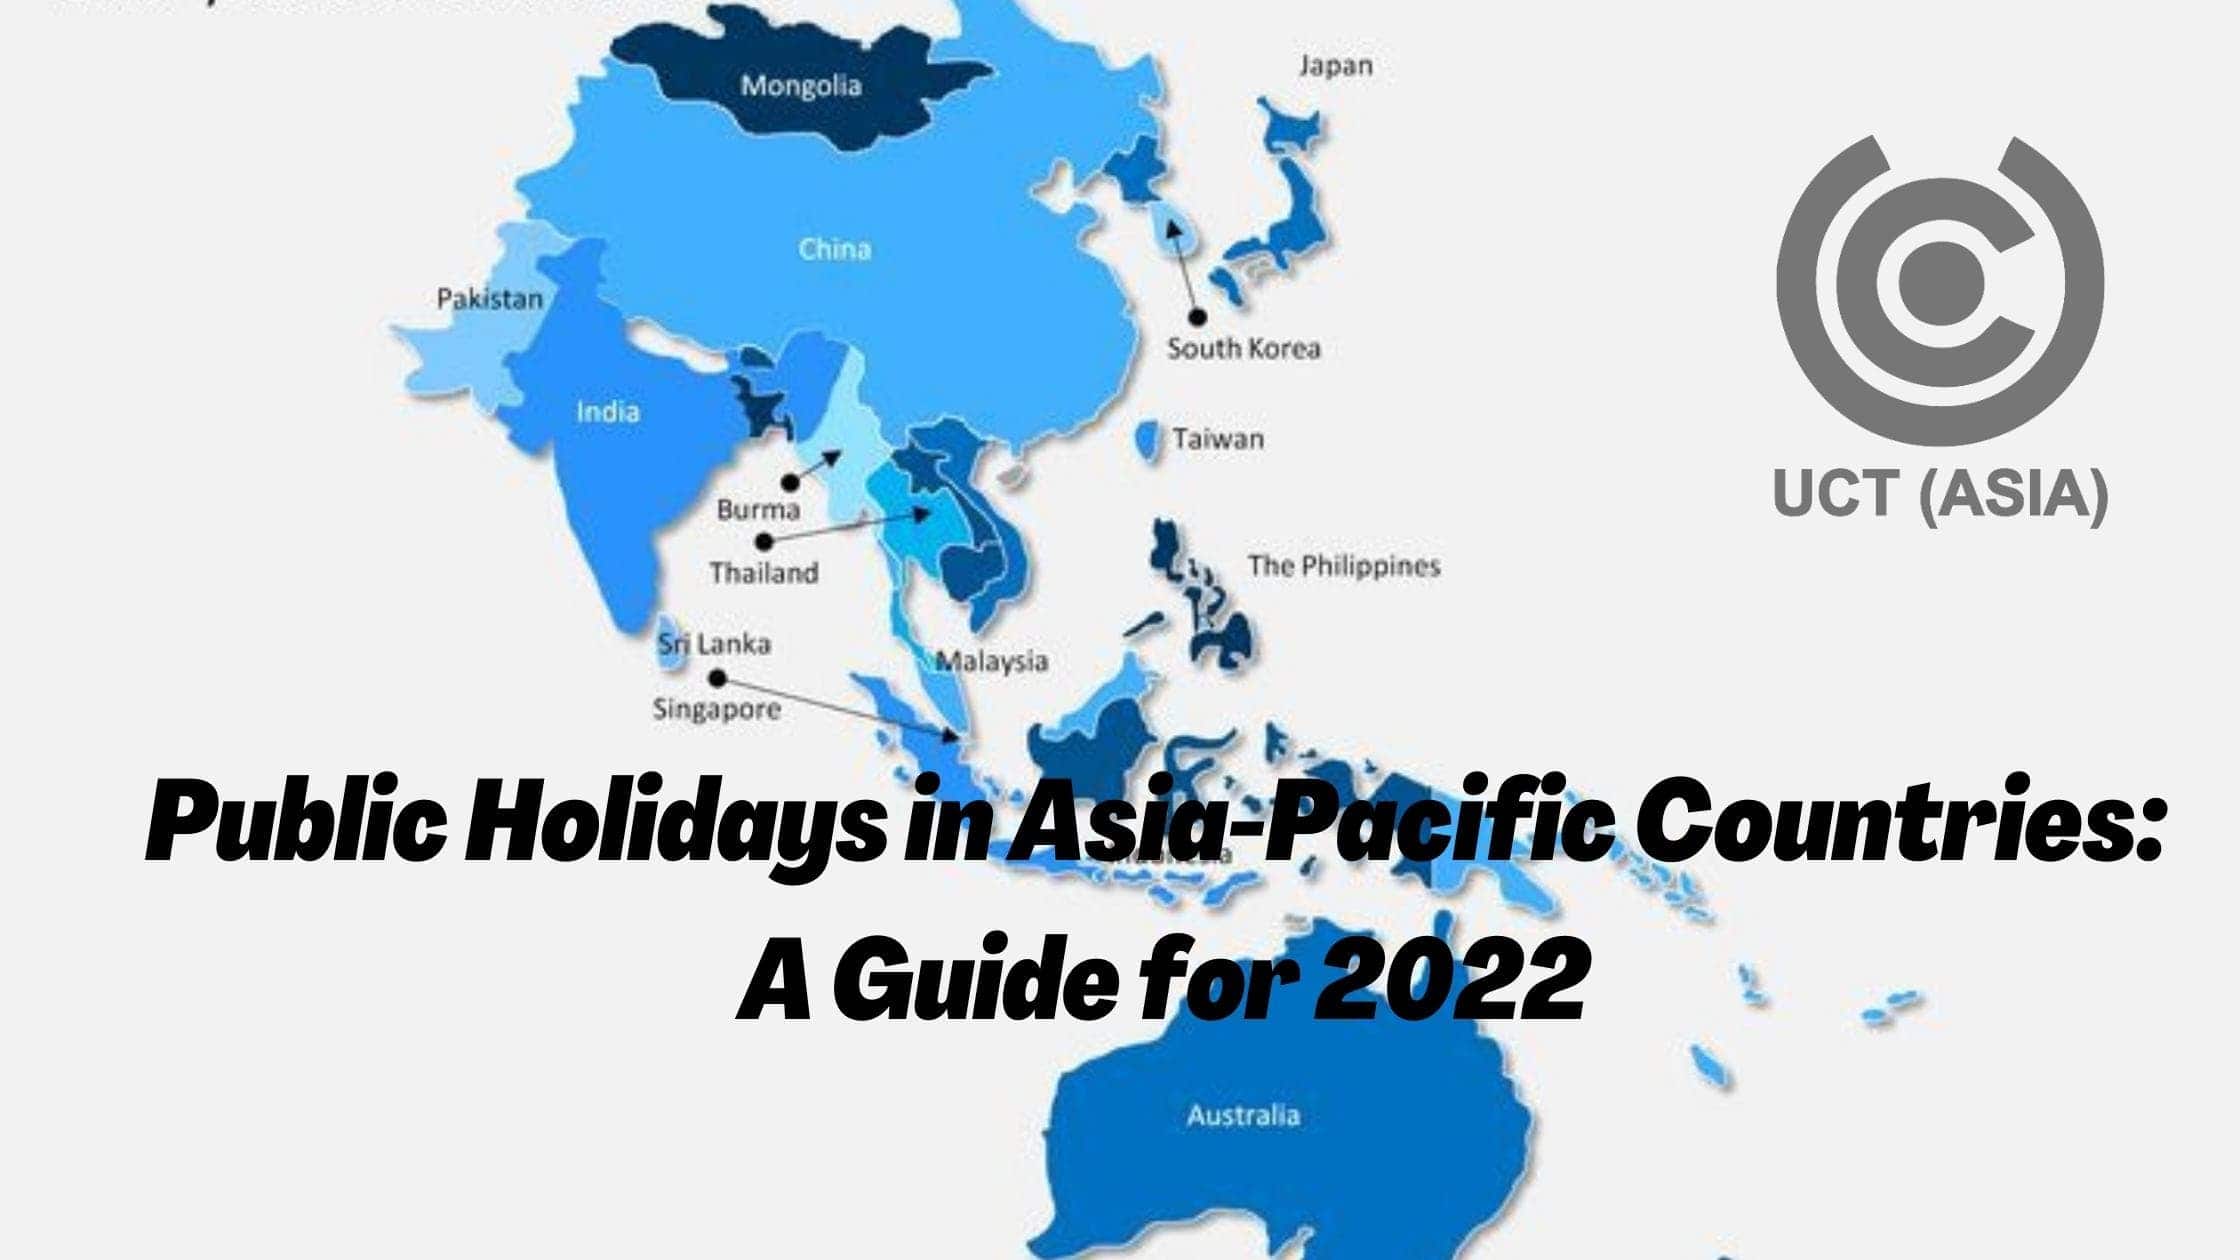 Public Holidays in AsiaPacific Countries A Guide for 2022 UCT (Asia)